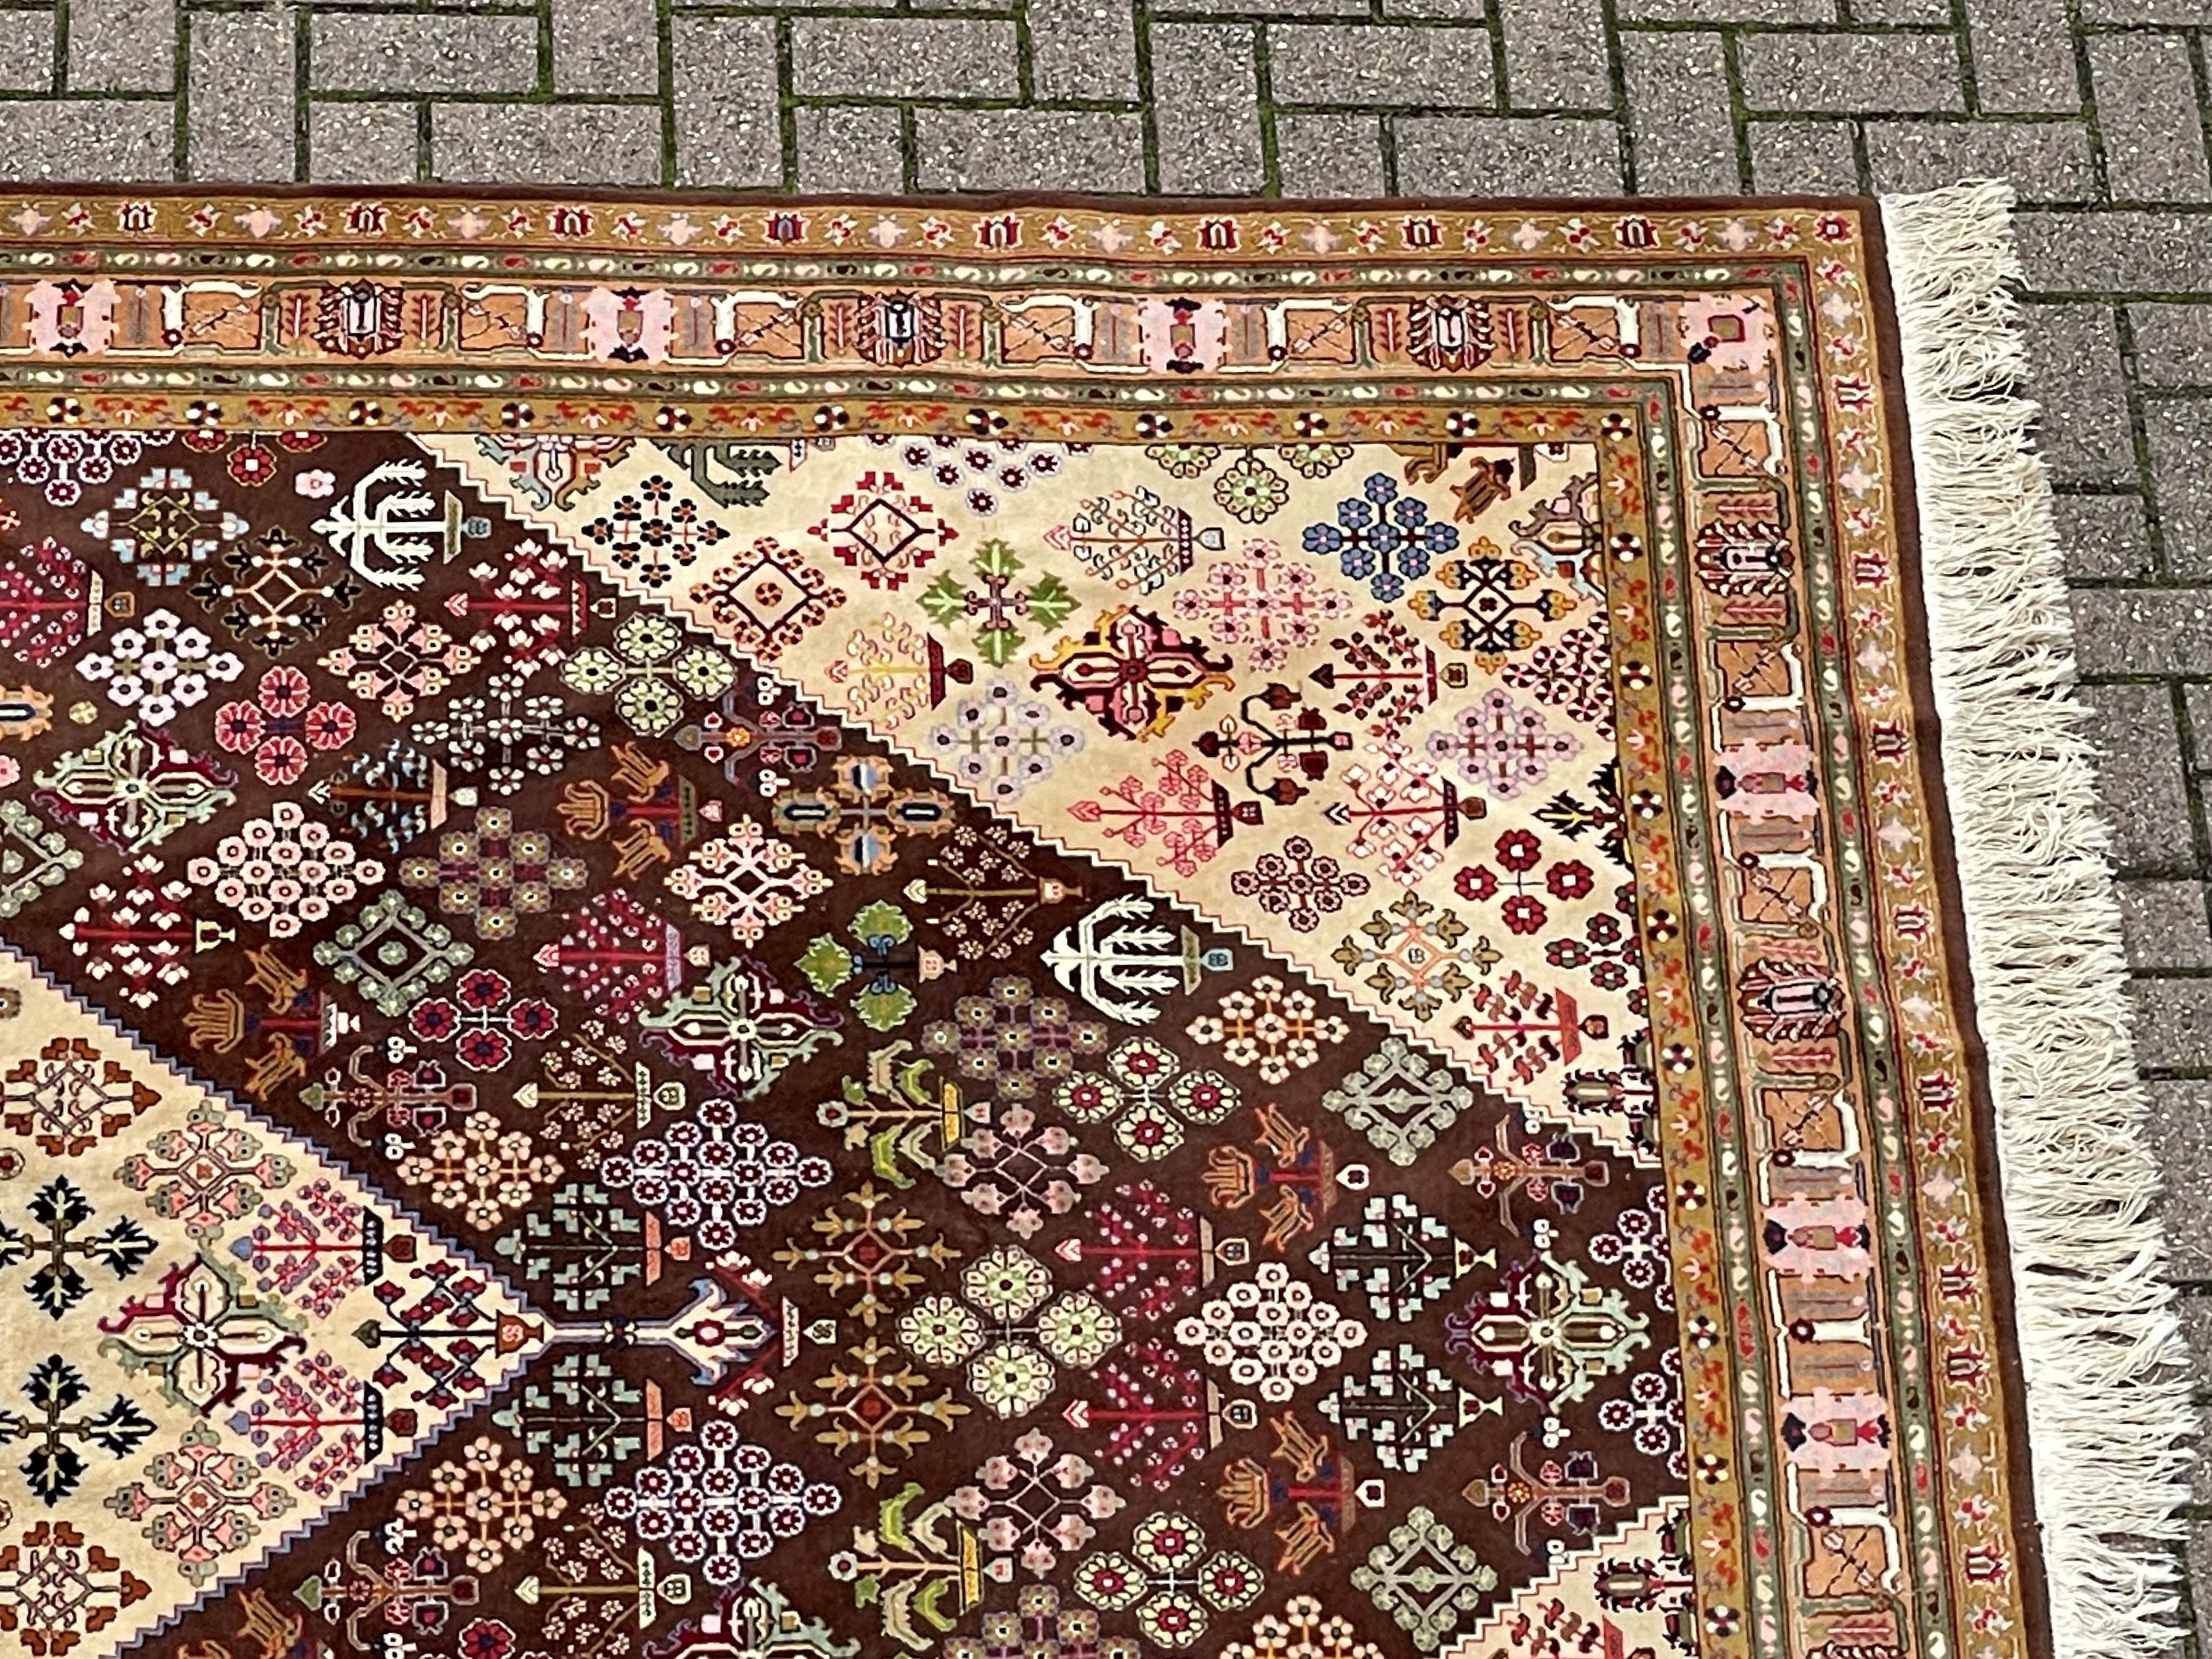 Dyed Good Size & Great Looking Vintage Hand Knotted Rug / Carpet with Vibrant Colors For Sale